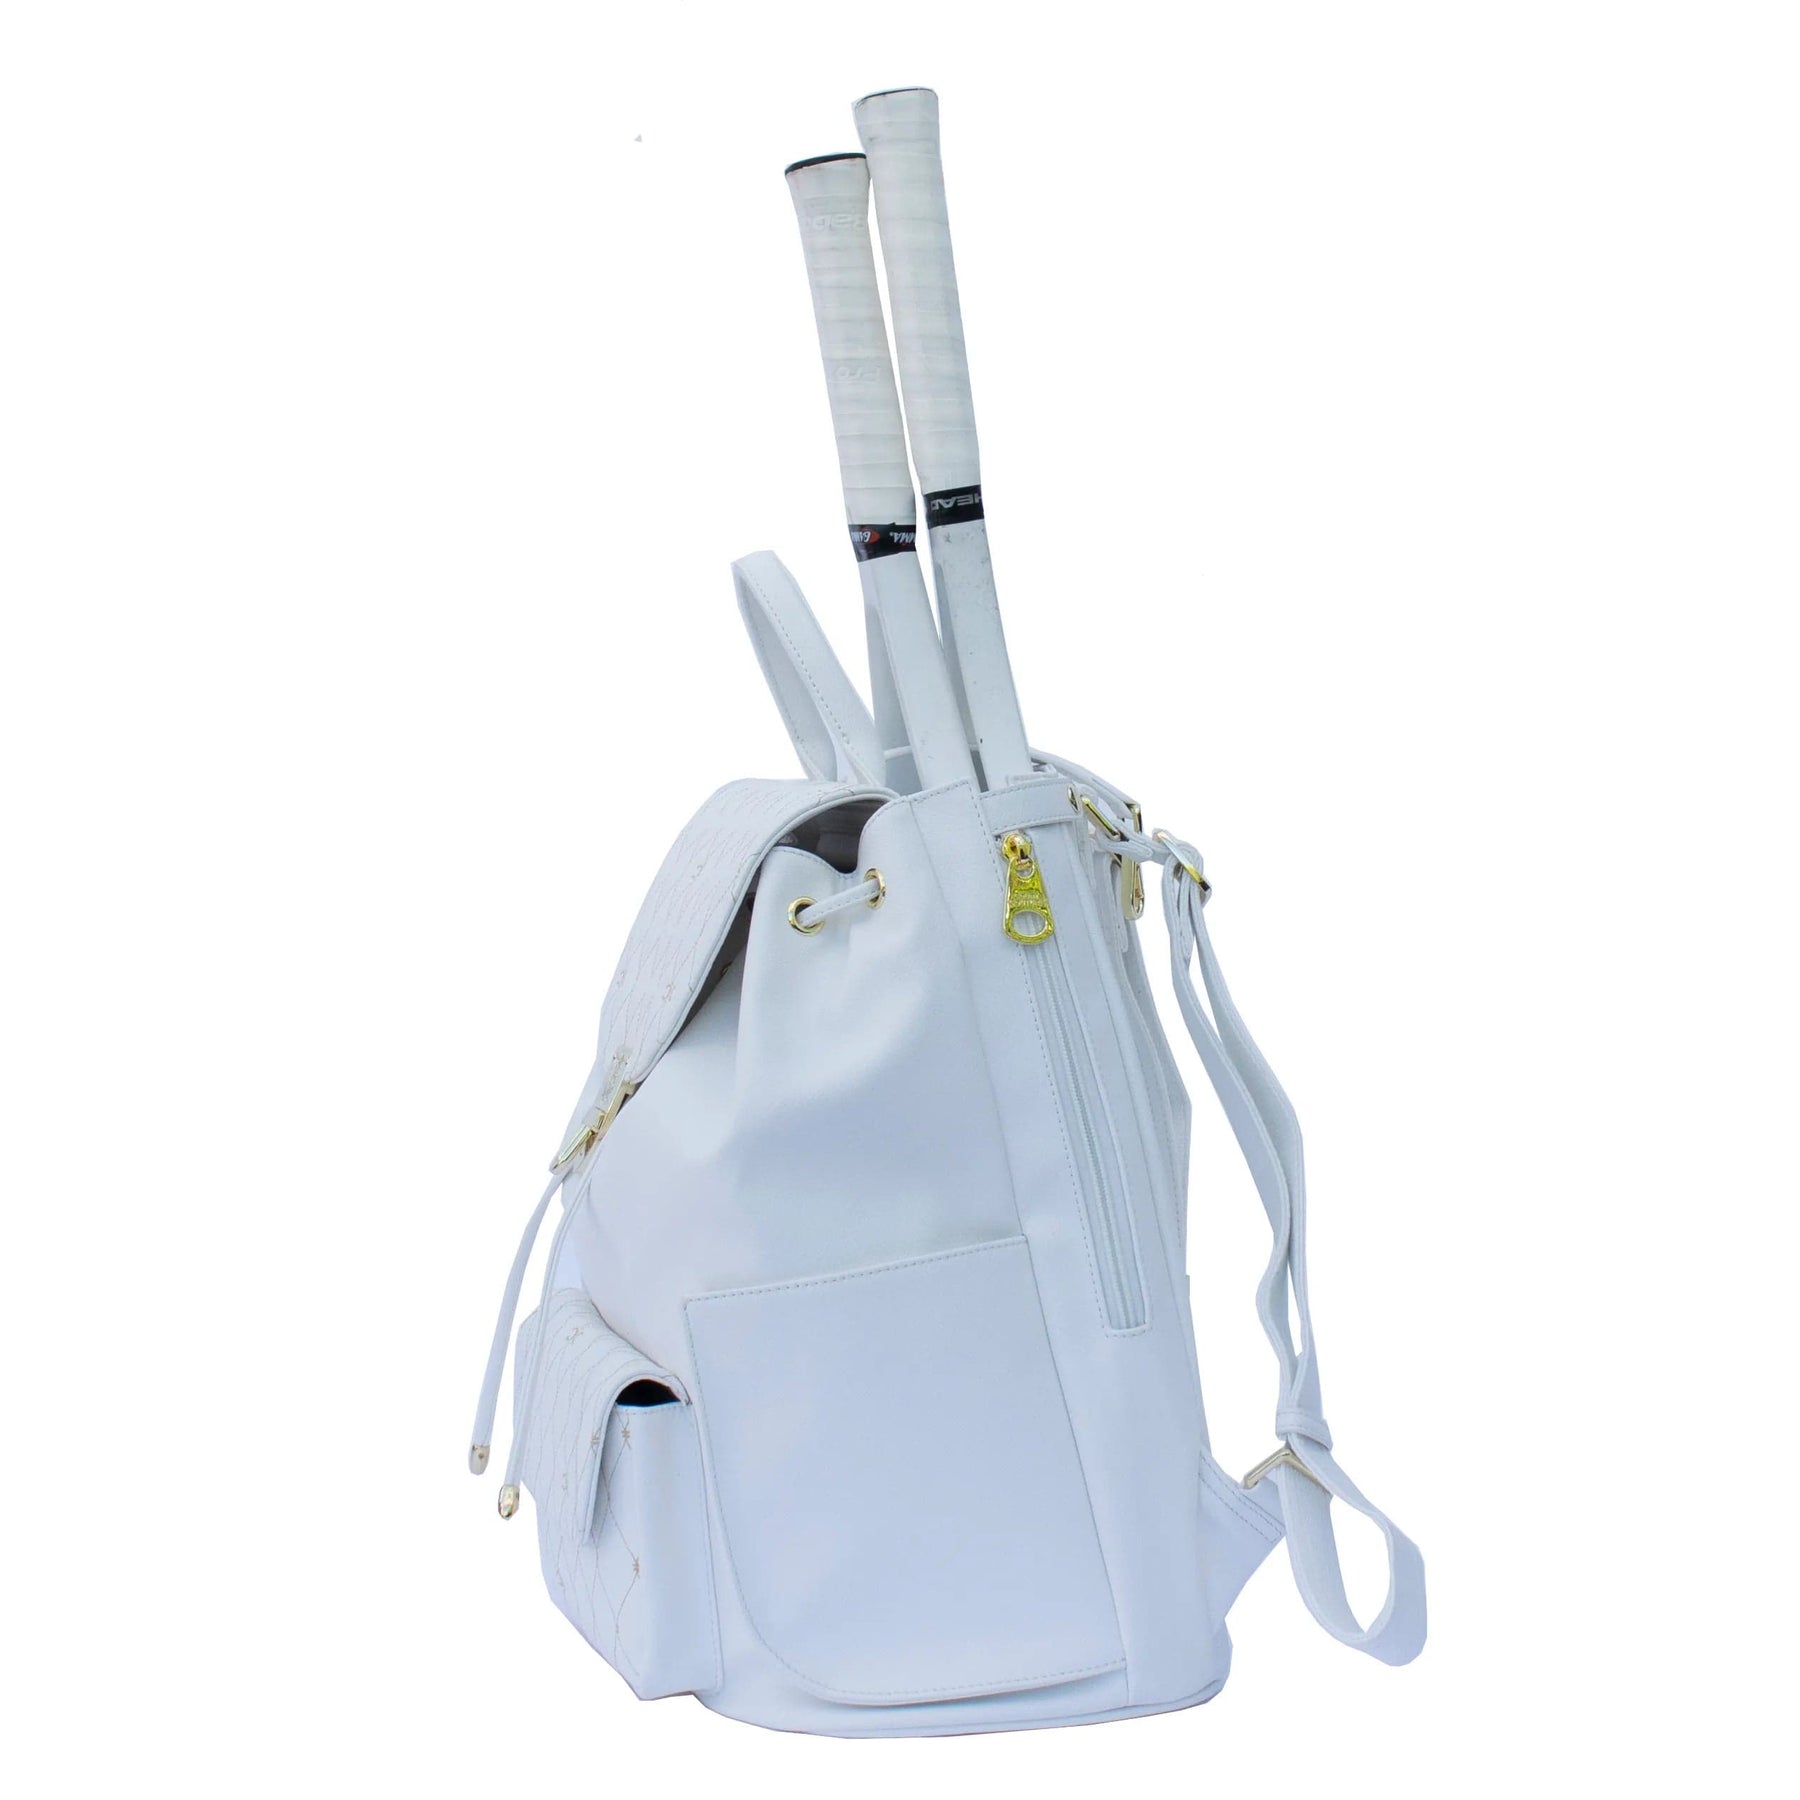 Court Couture Women's Hampton Embroidery White Tennis Backpack